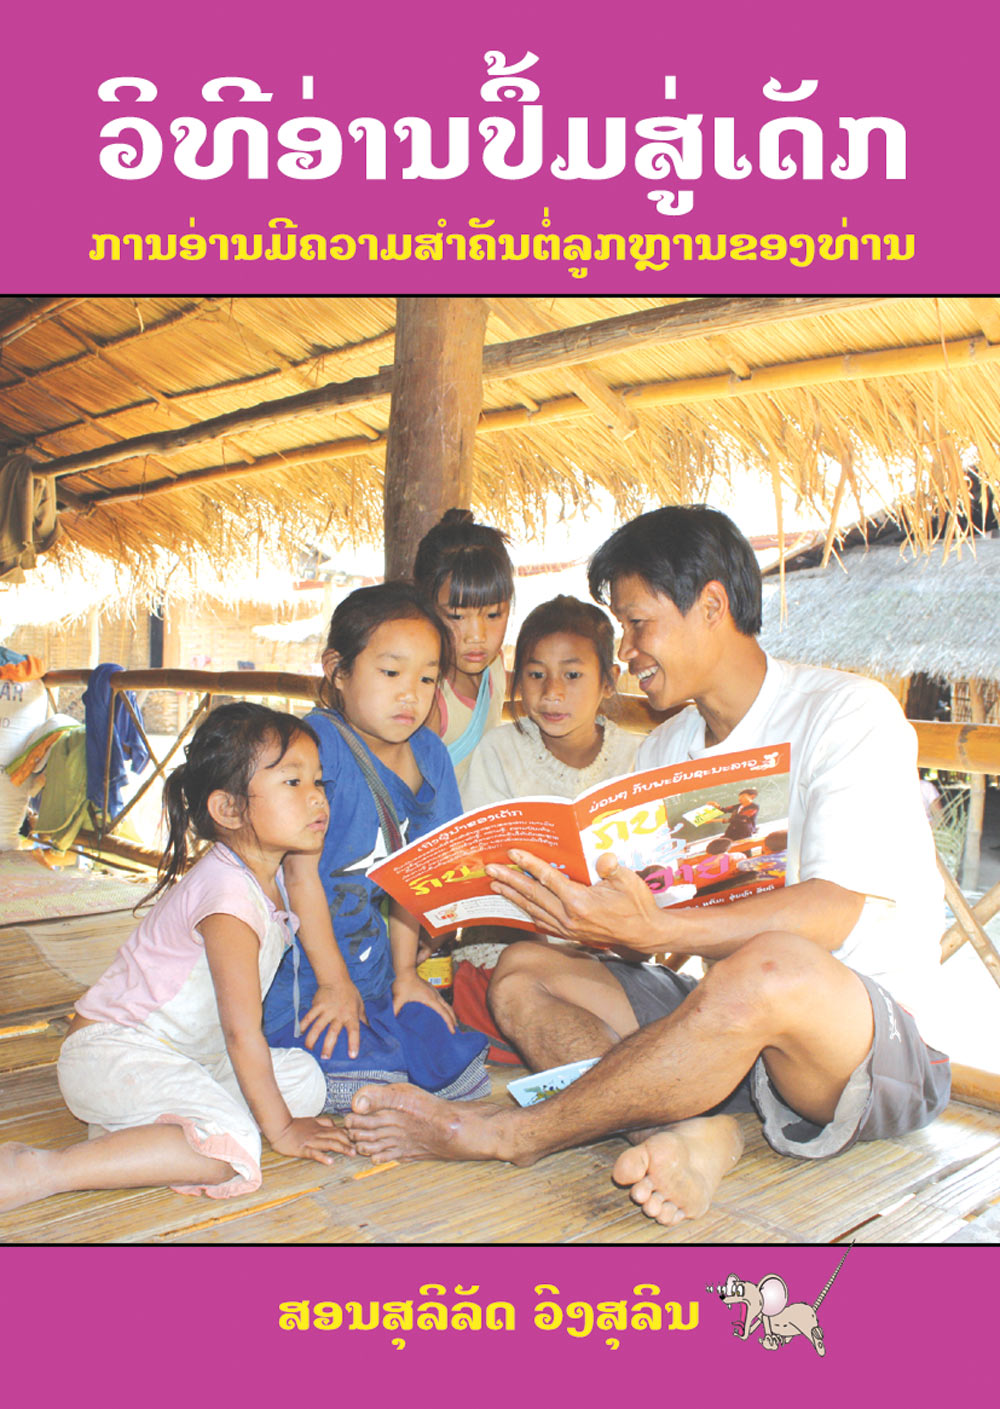 The Joy of Reading large book cover, published in Lao language